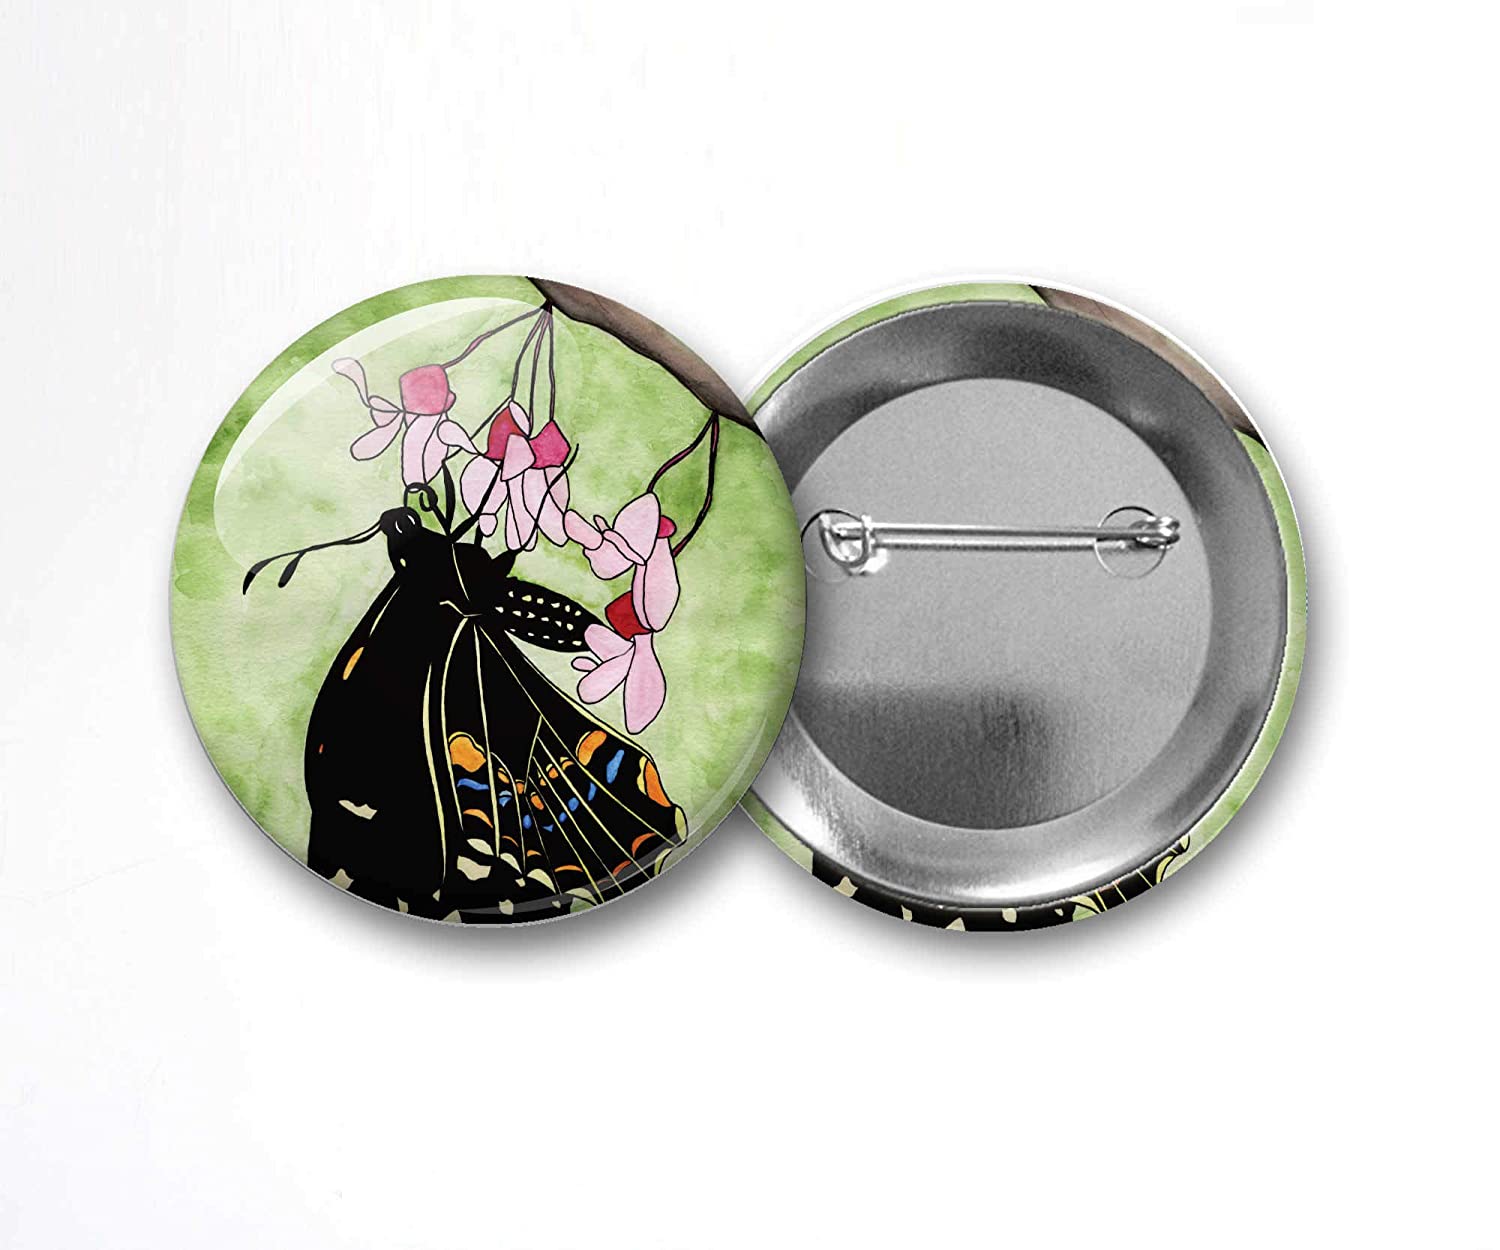 PinkPolish Design Buttons "Flutterbye" Pin Back Button, 2.25"